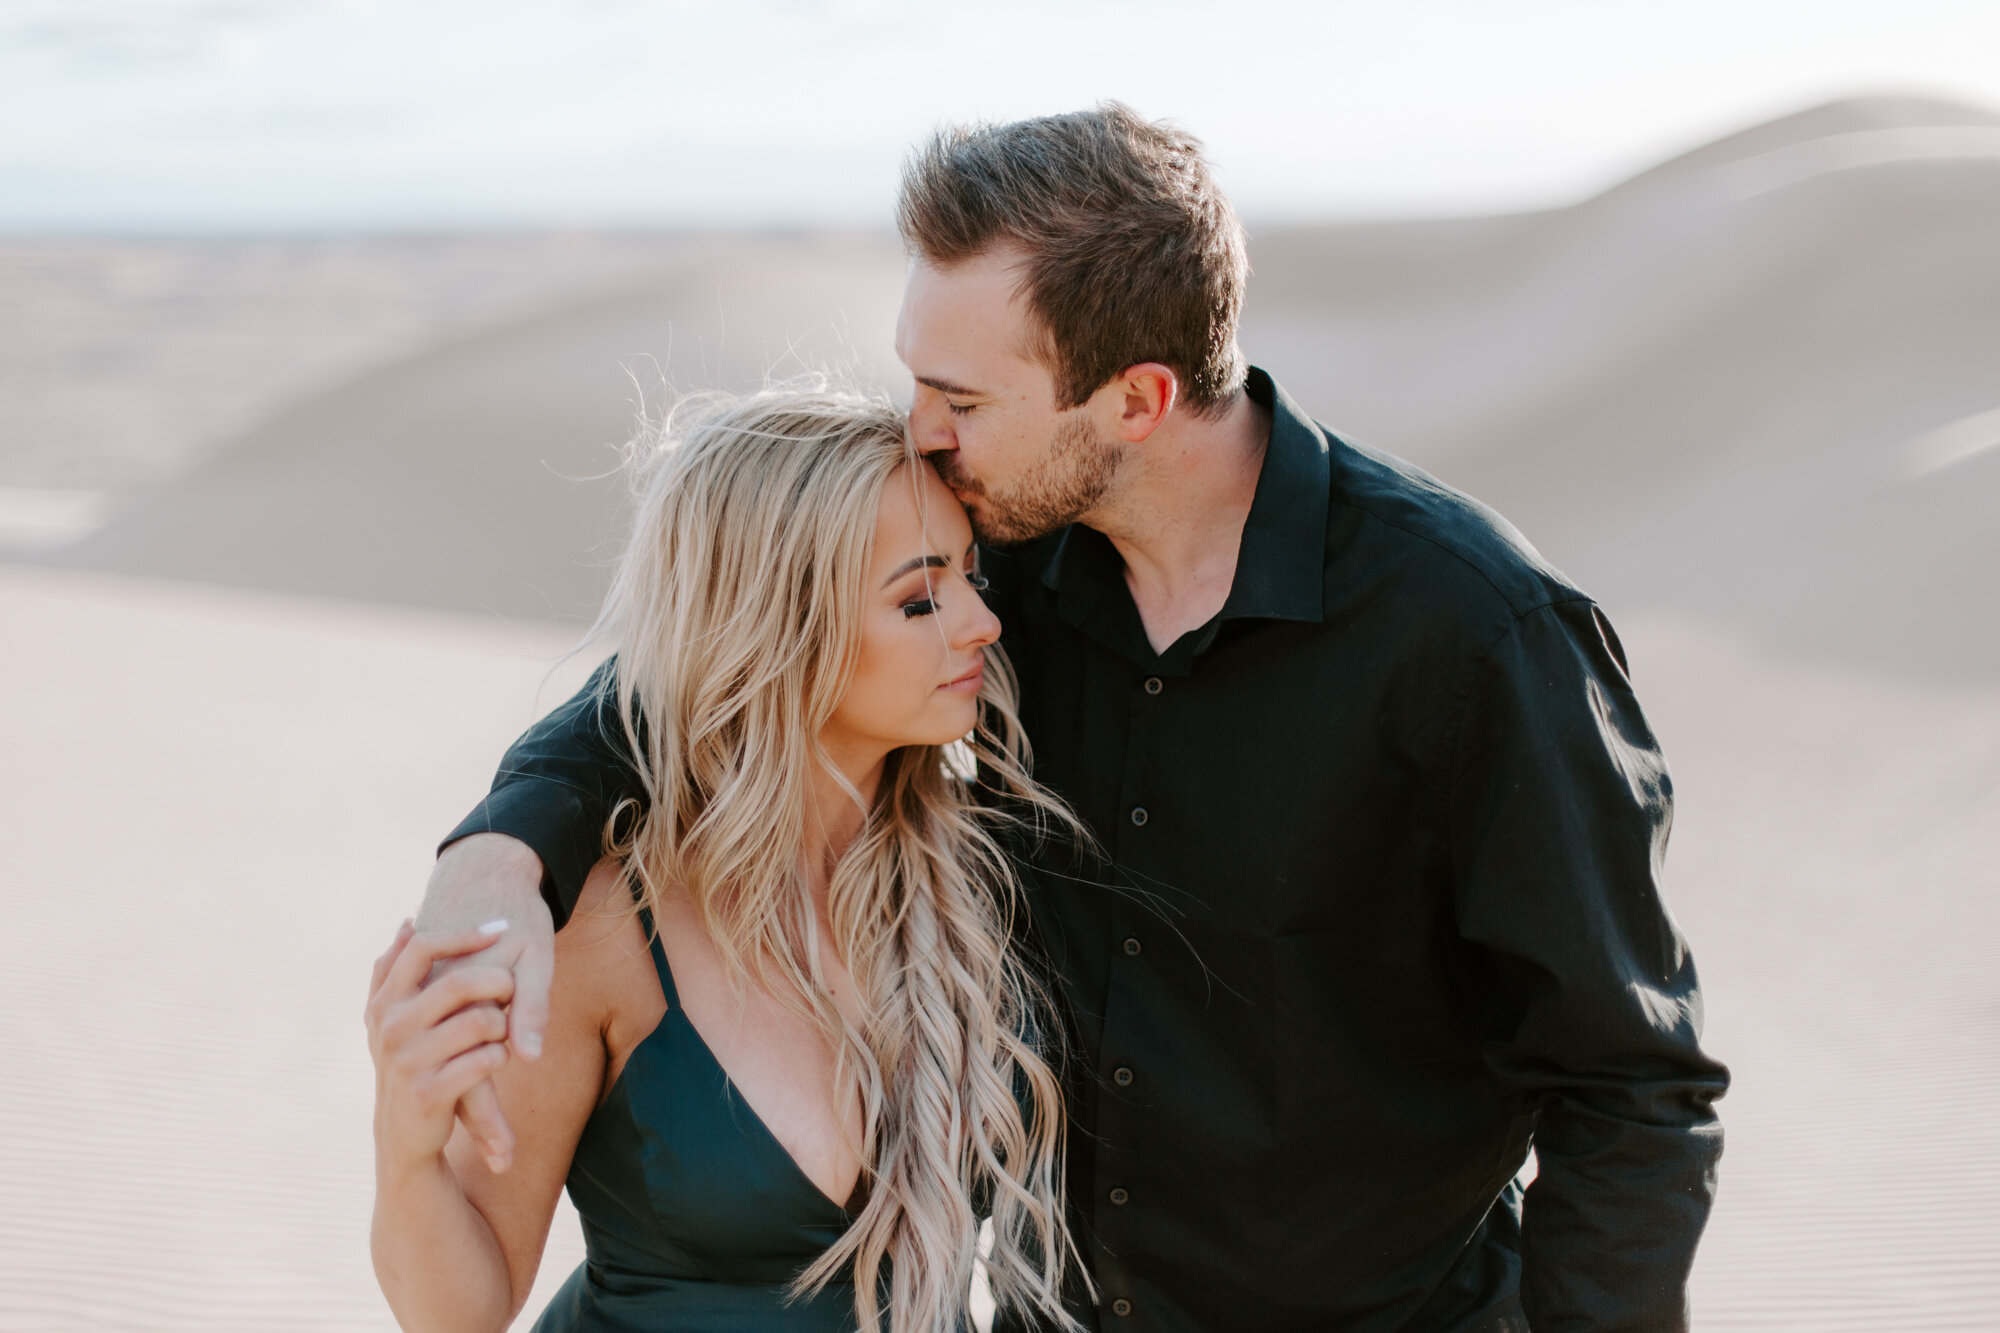 Engagement photos done at Imperial Sand Dunes also known as the Glamis Sand Dunes in california, Imperial sand dunes, glamis sand dunes, Glamis Sand Dunes engagement, imperial sand dunes engagement